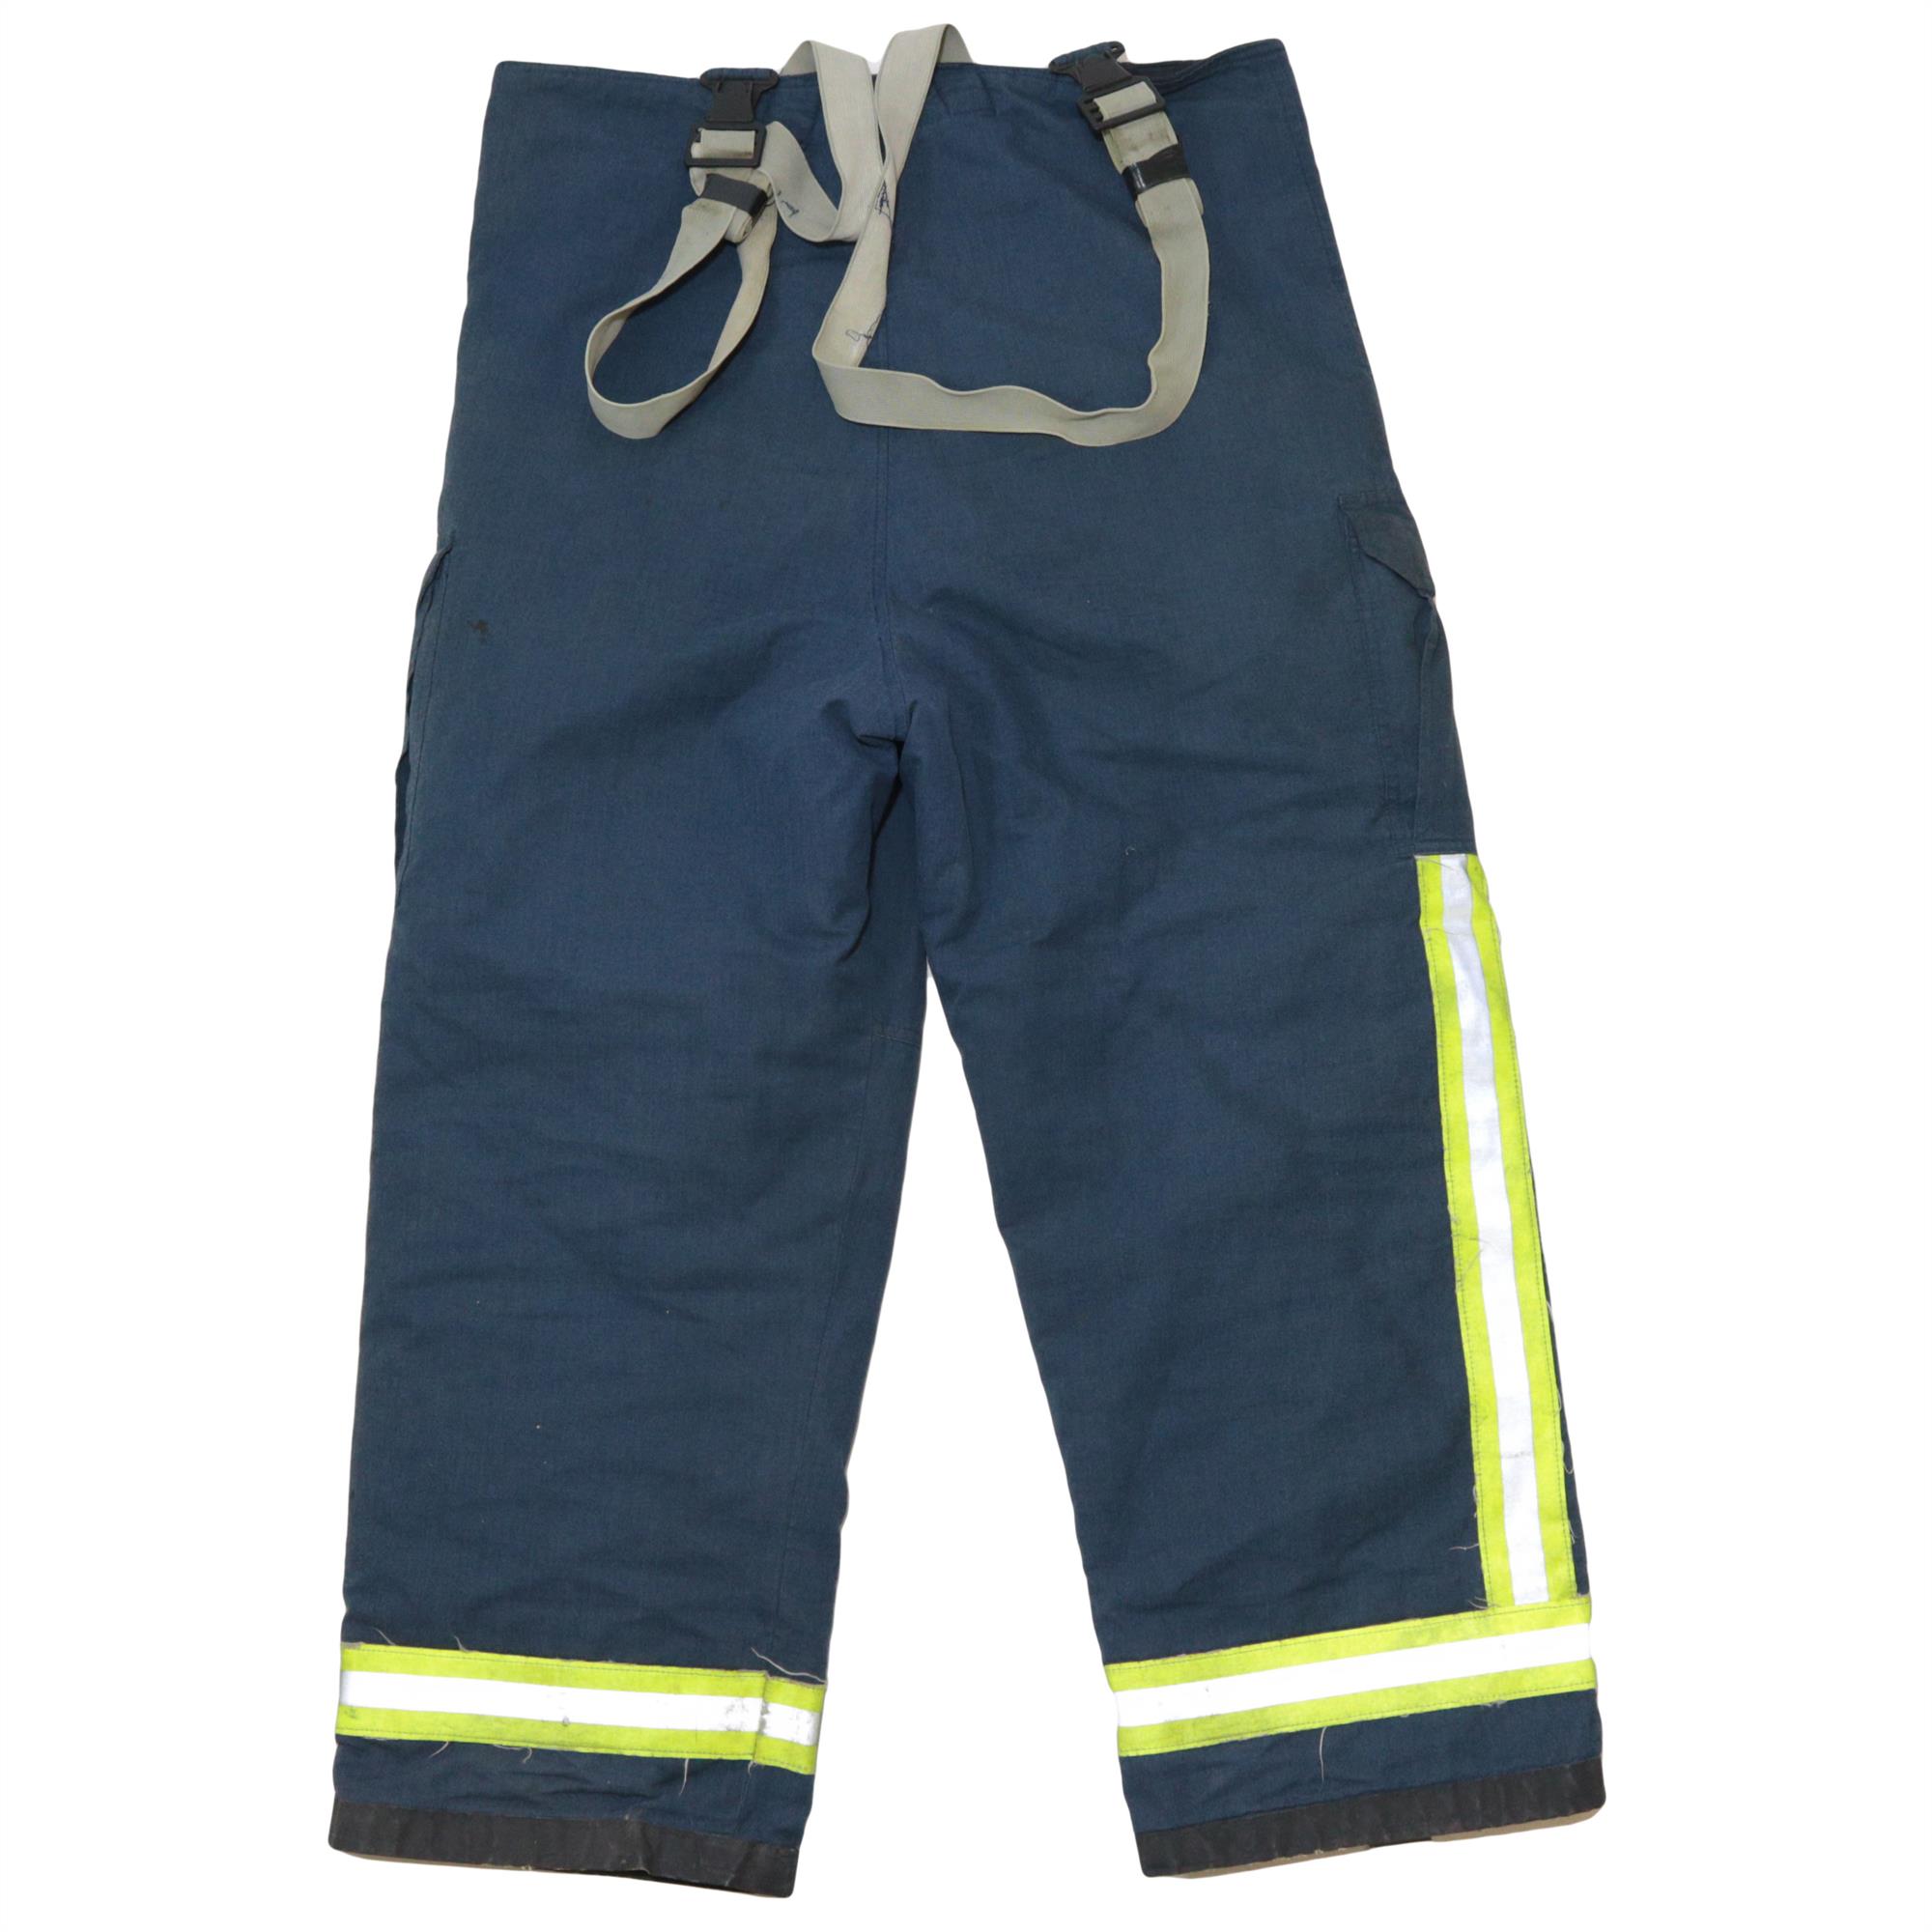 British Fire Service Trousers Good Used Condition - Surplus & Lost